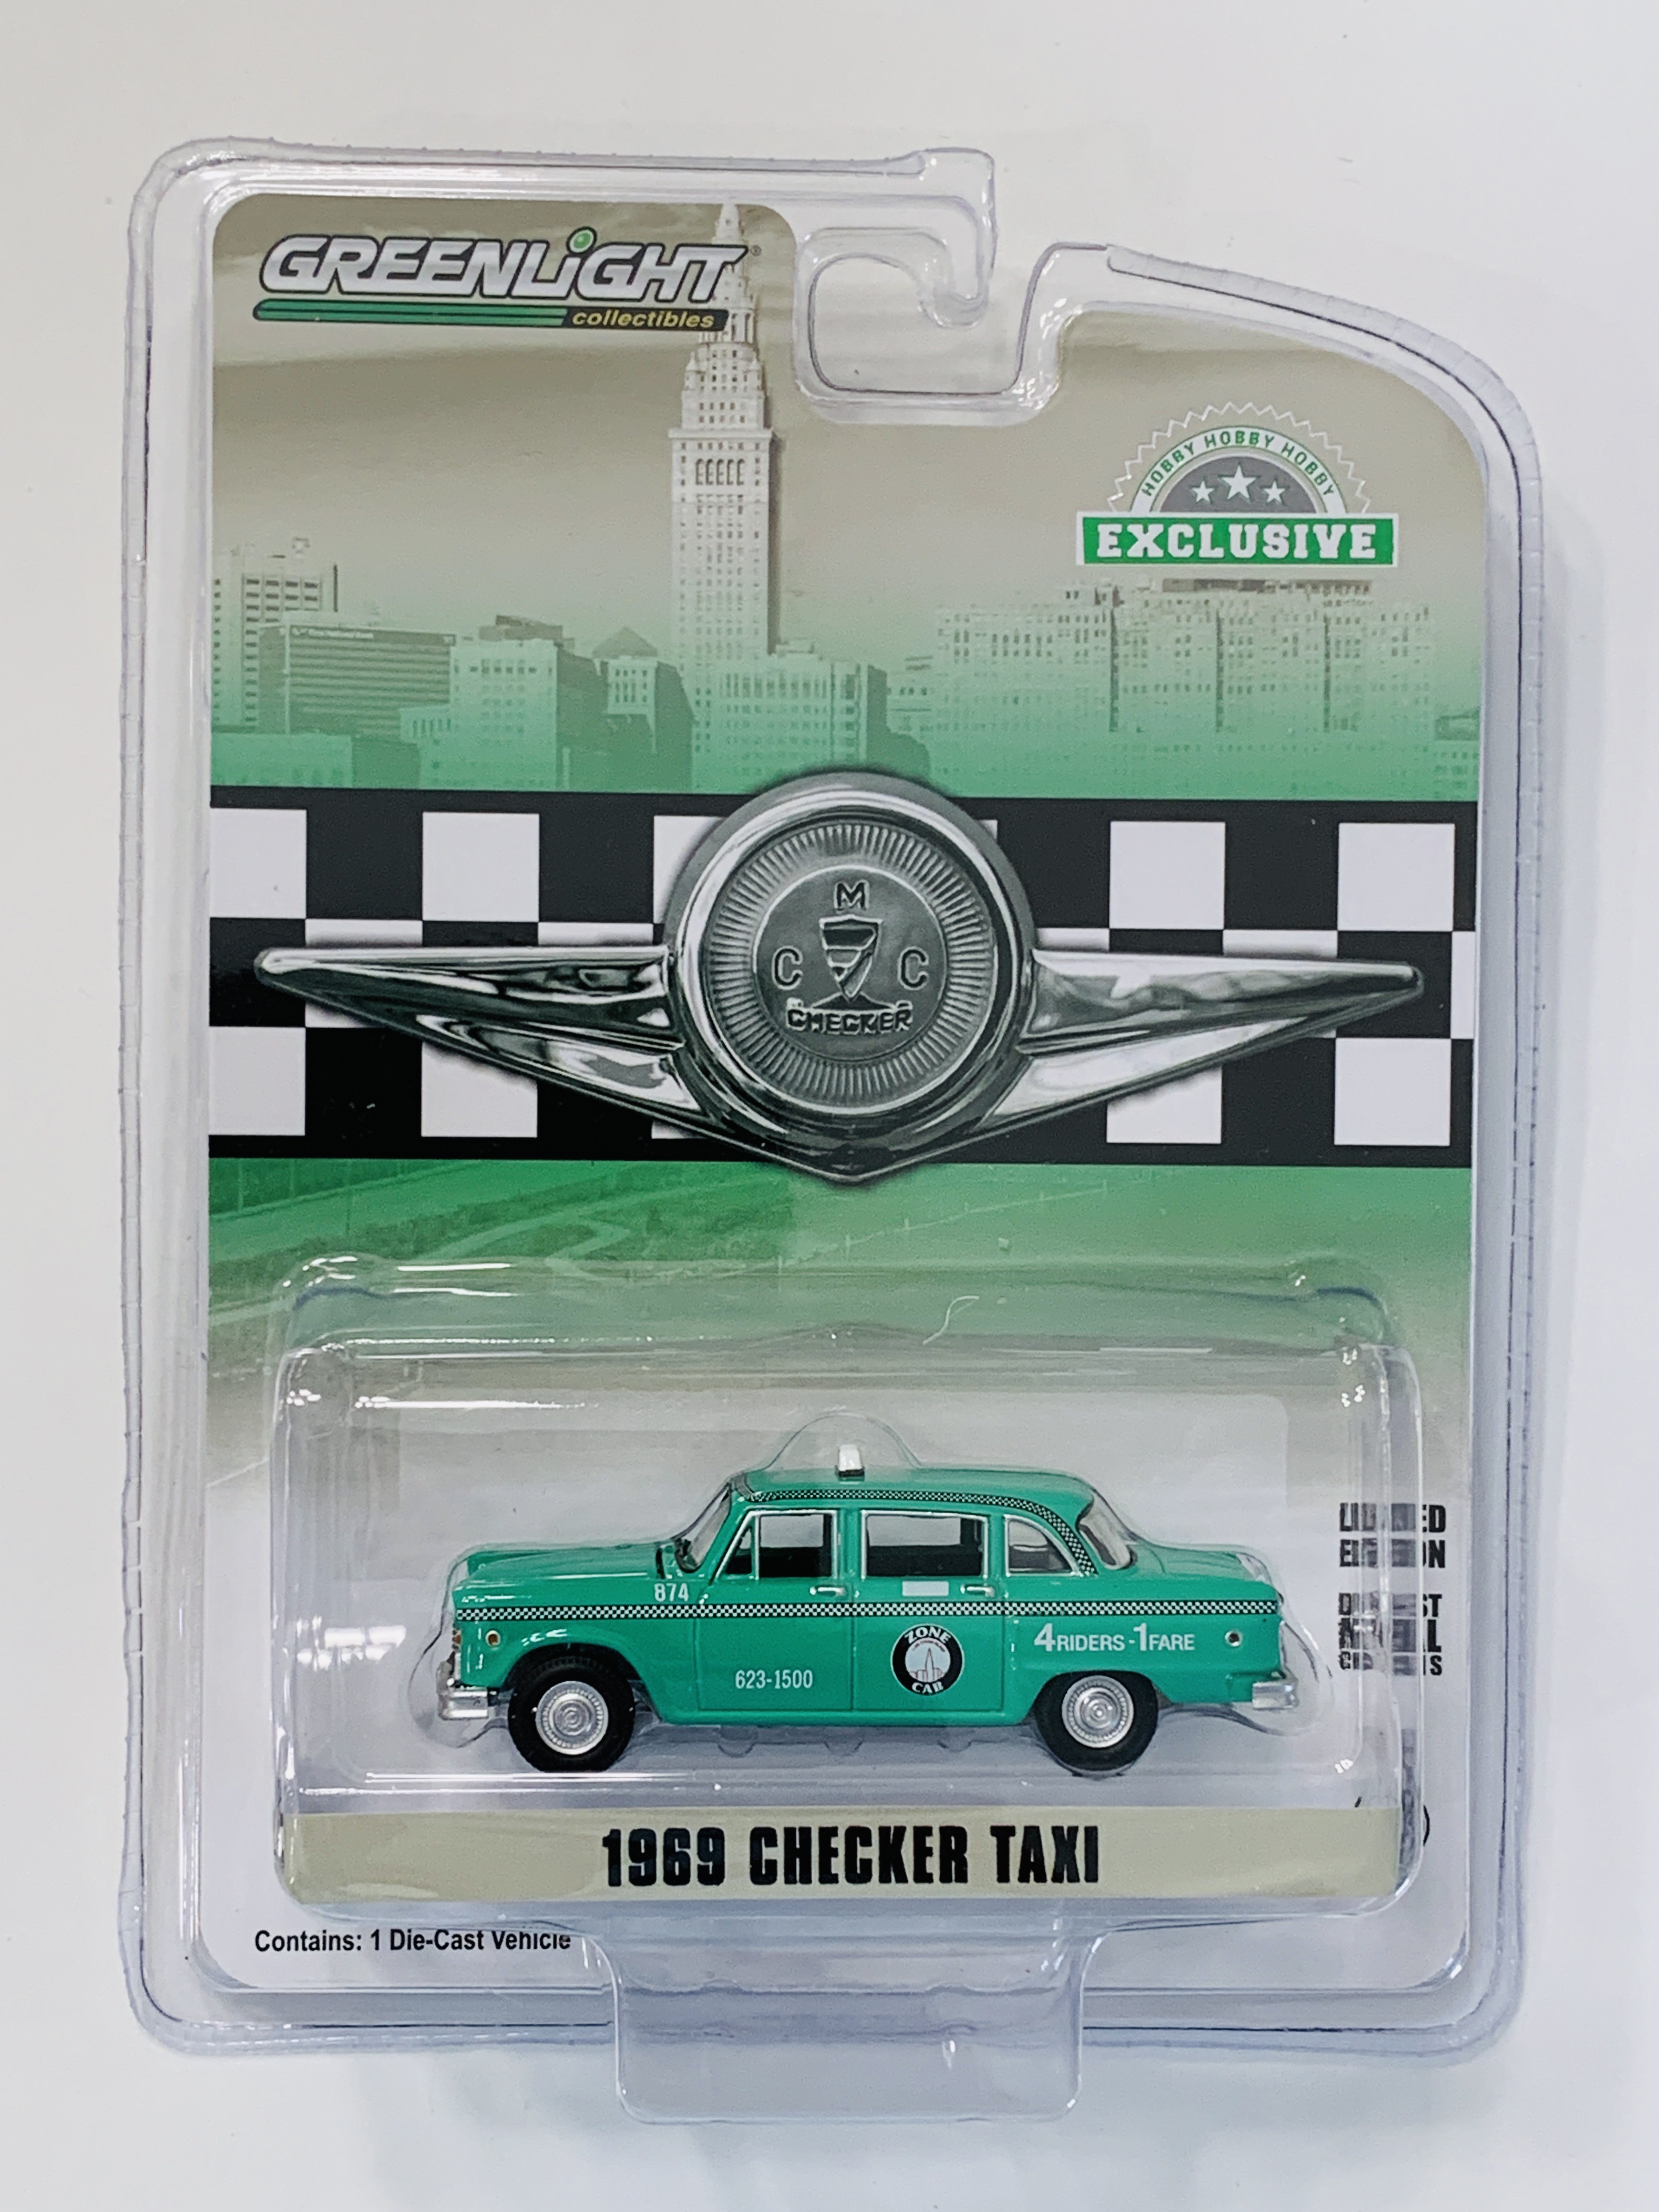 Greenlight Hobby Exclusive 1969 Checker Taxi